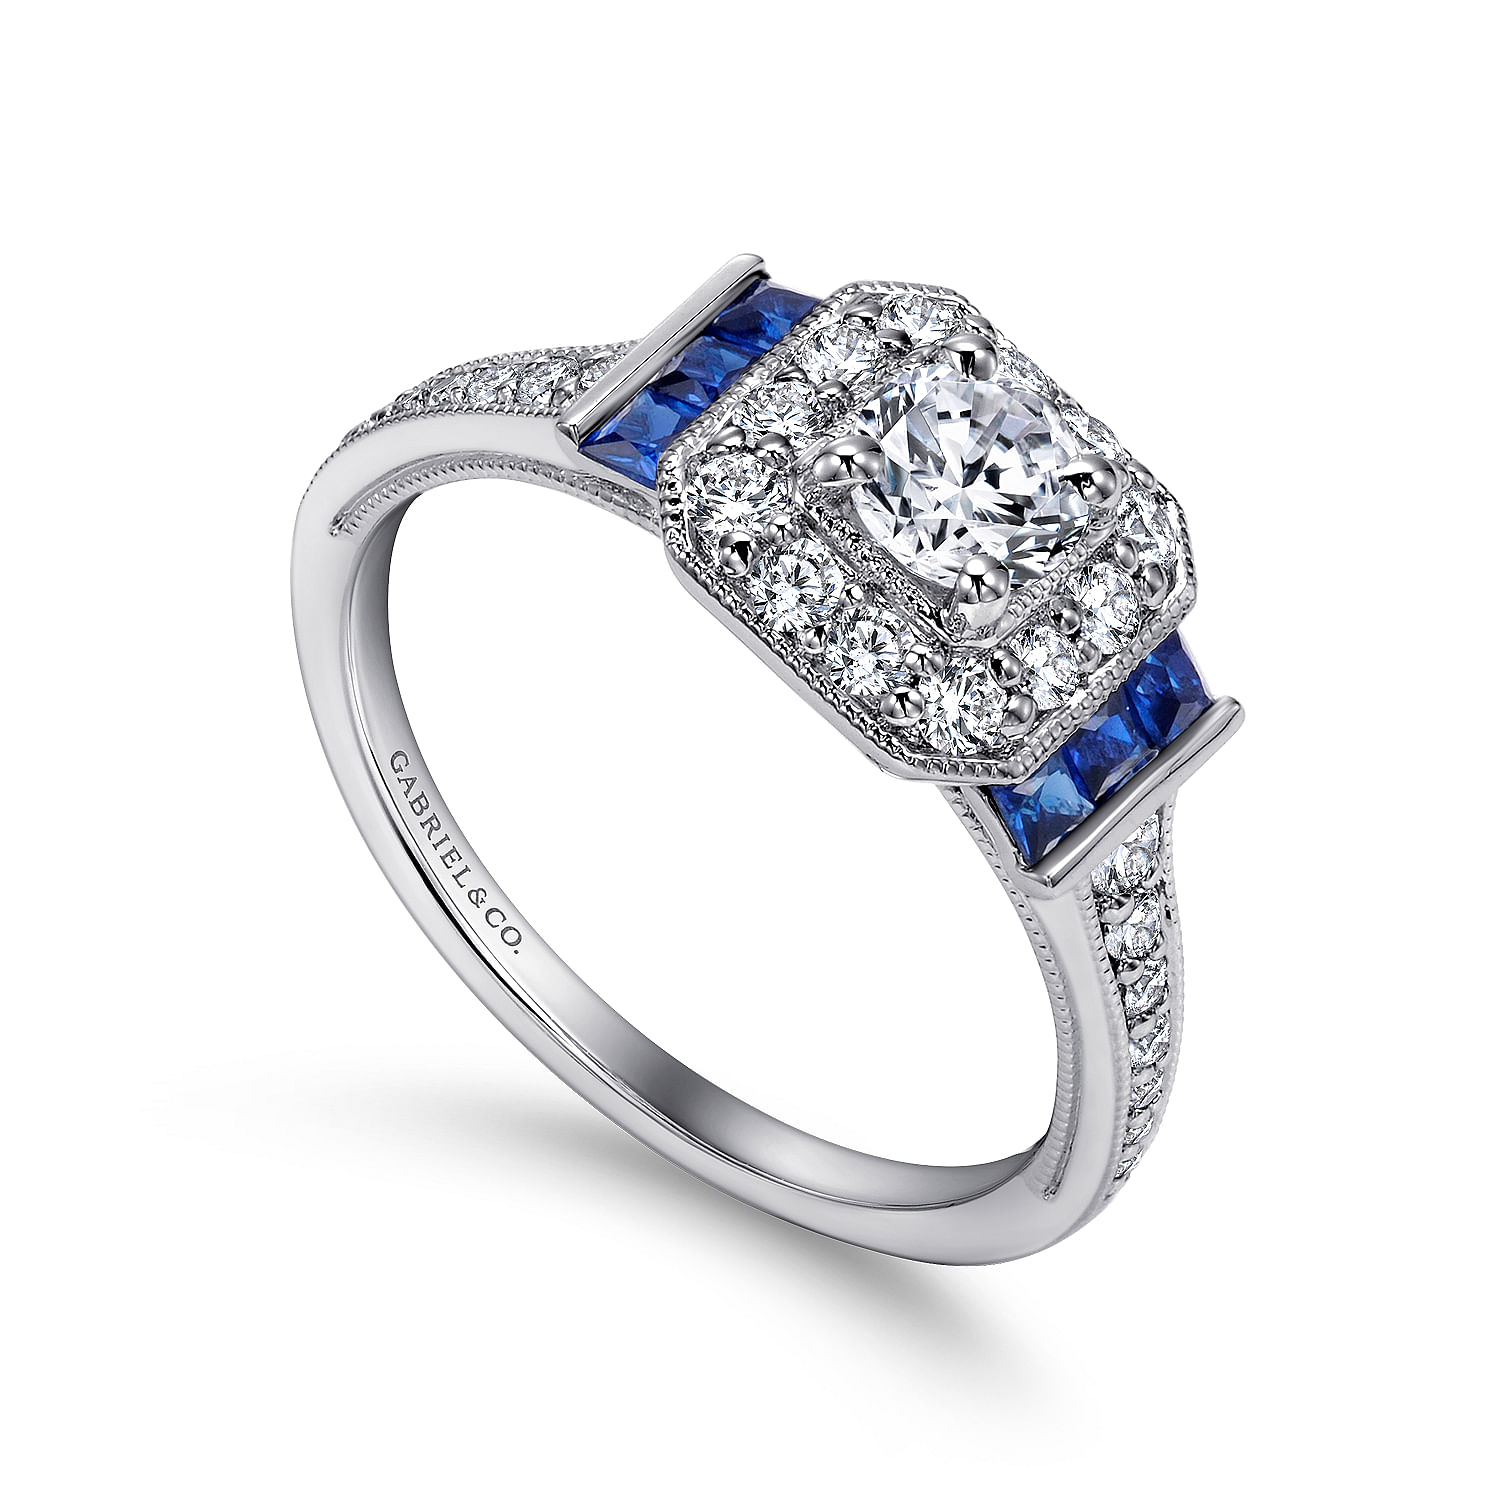 Vintage Inspired 14K White Gold Round Halo Sapphire and Diamond Channel Set Engagement Ring